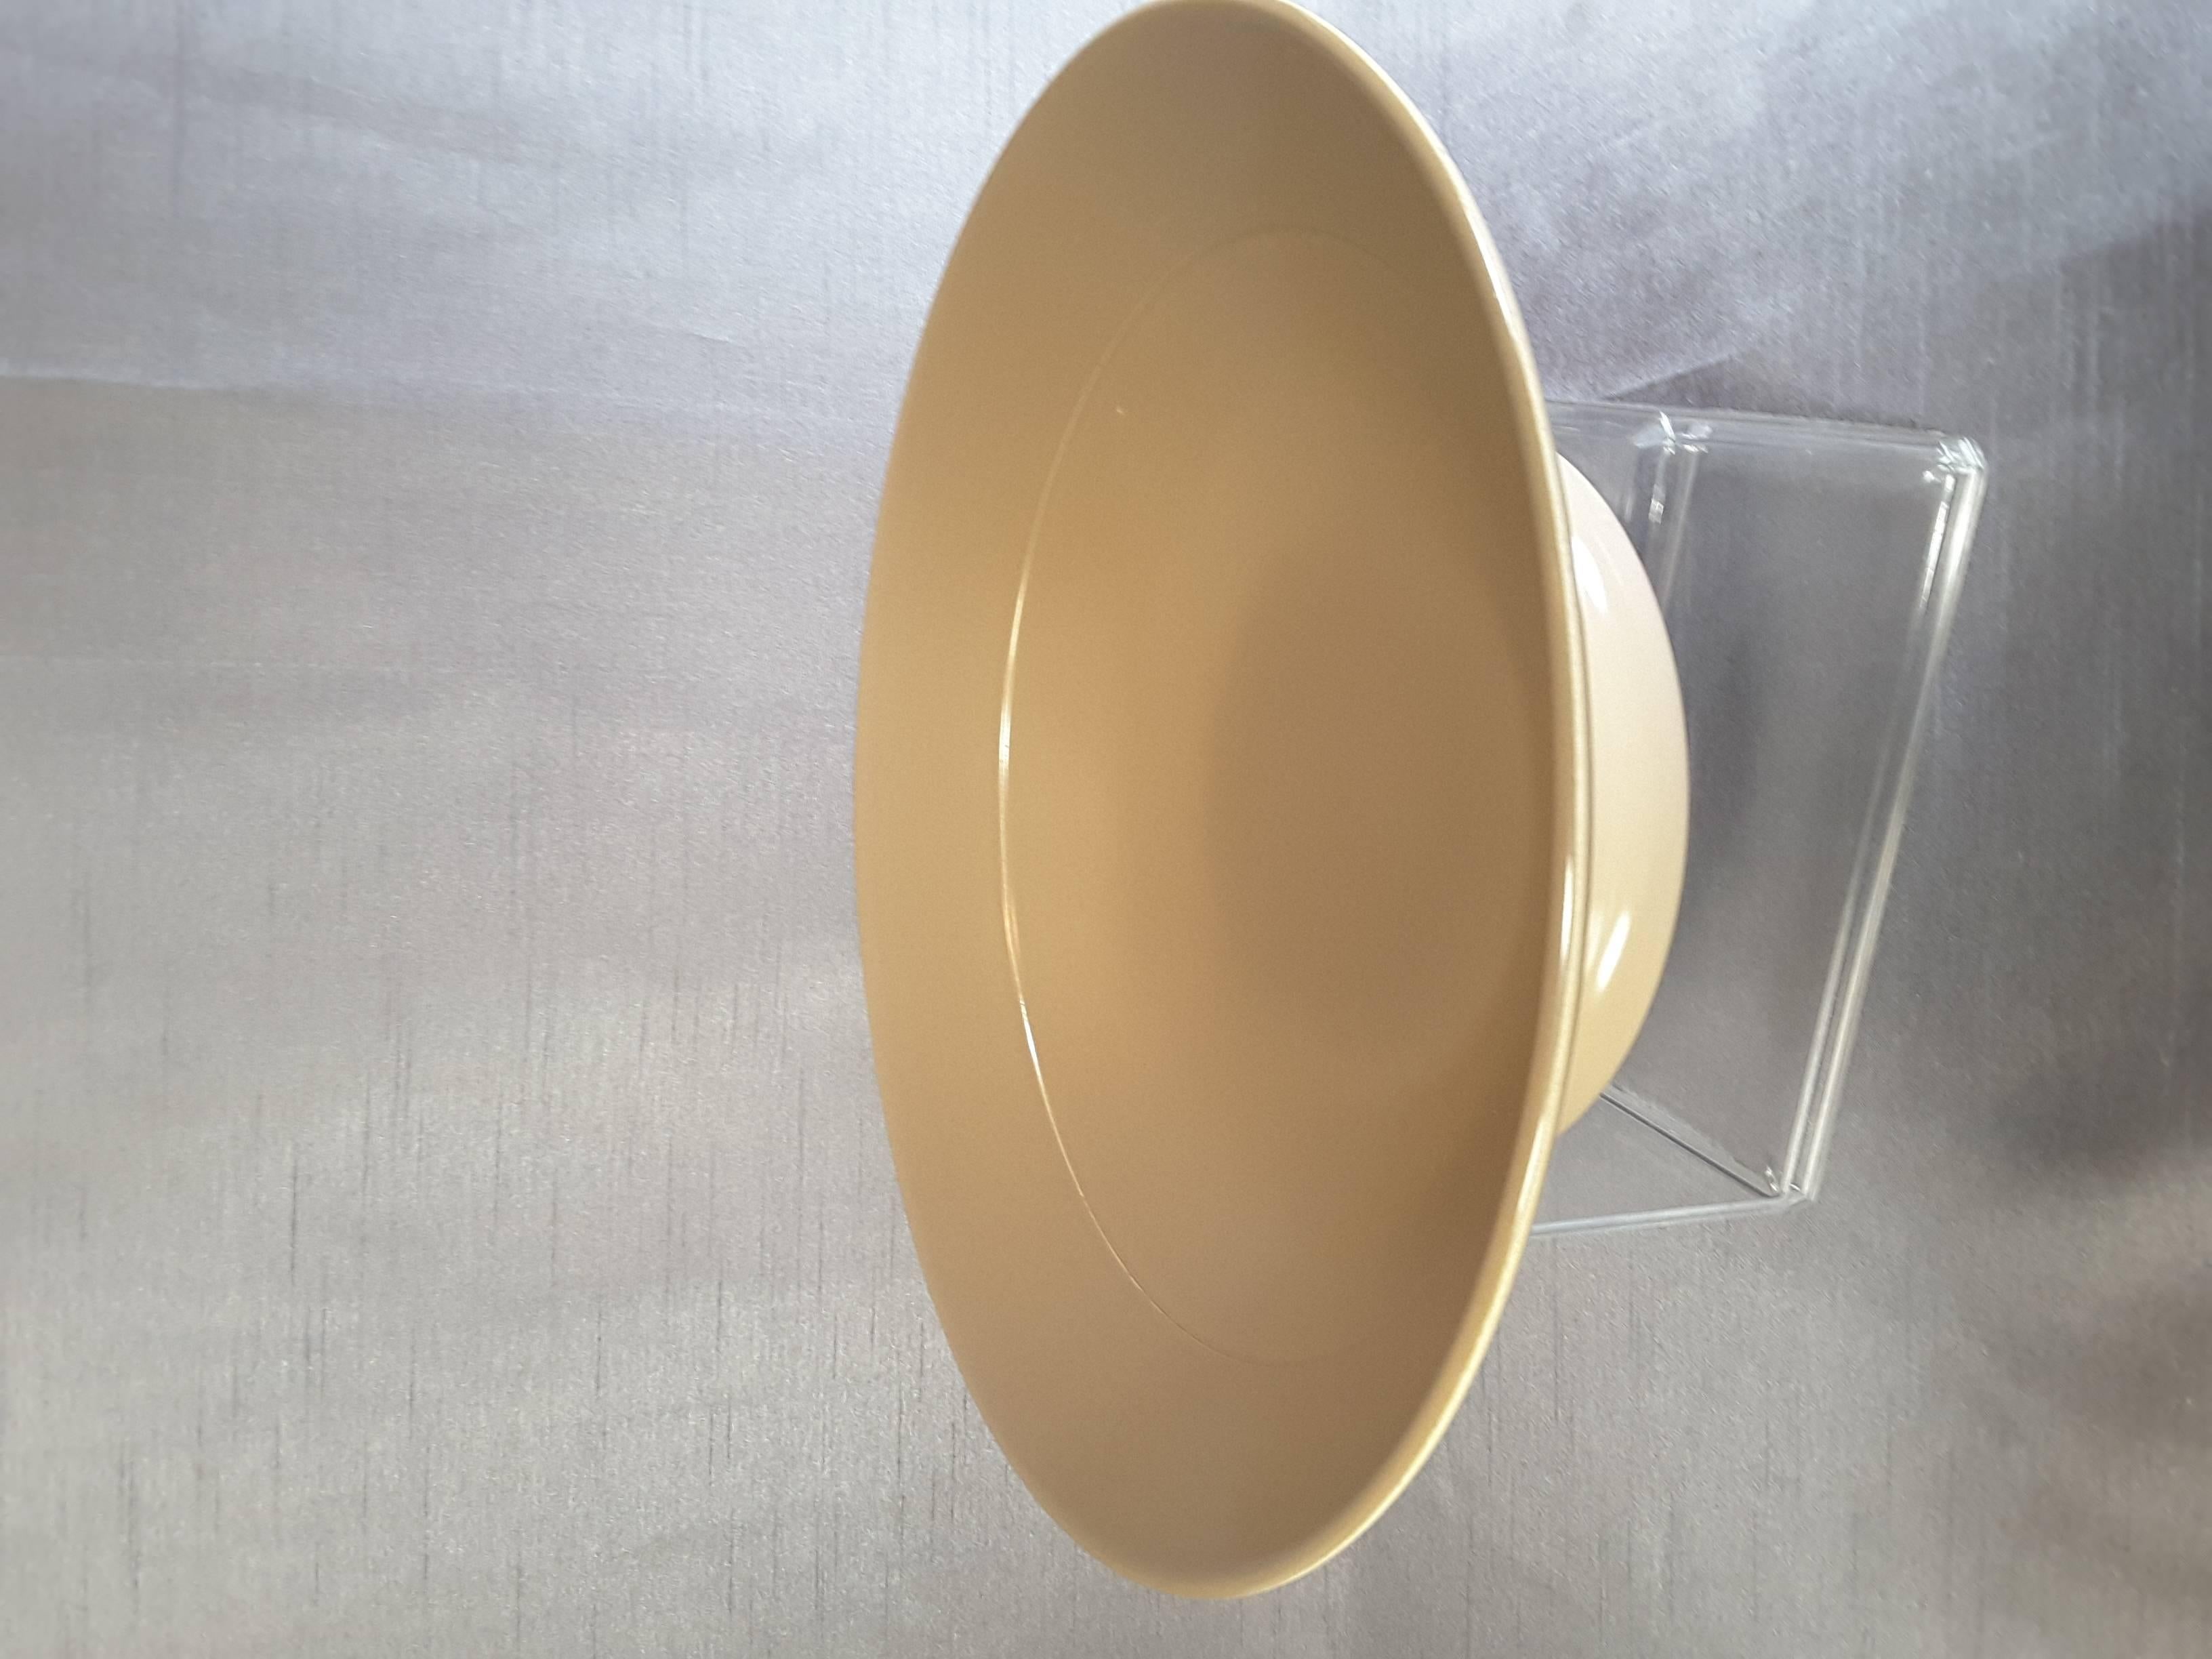 Mid-Century Poole Pottery Centre Bowl or Fruit Bowl 2